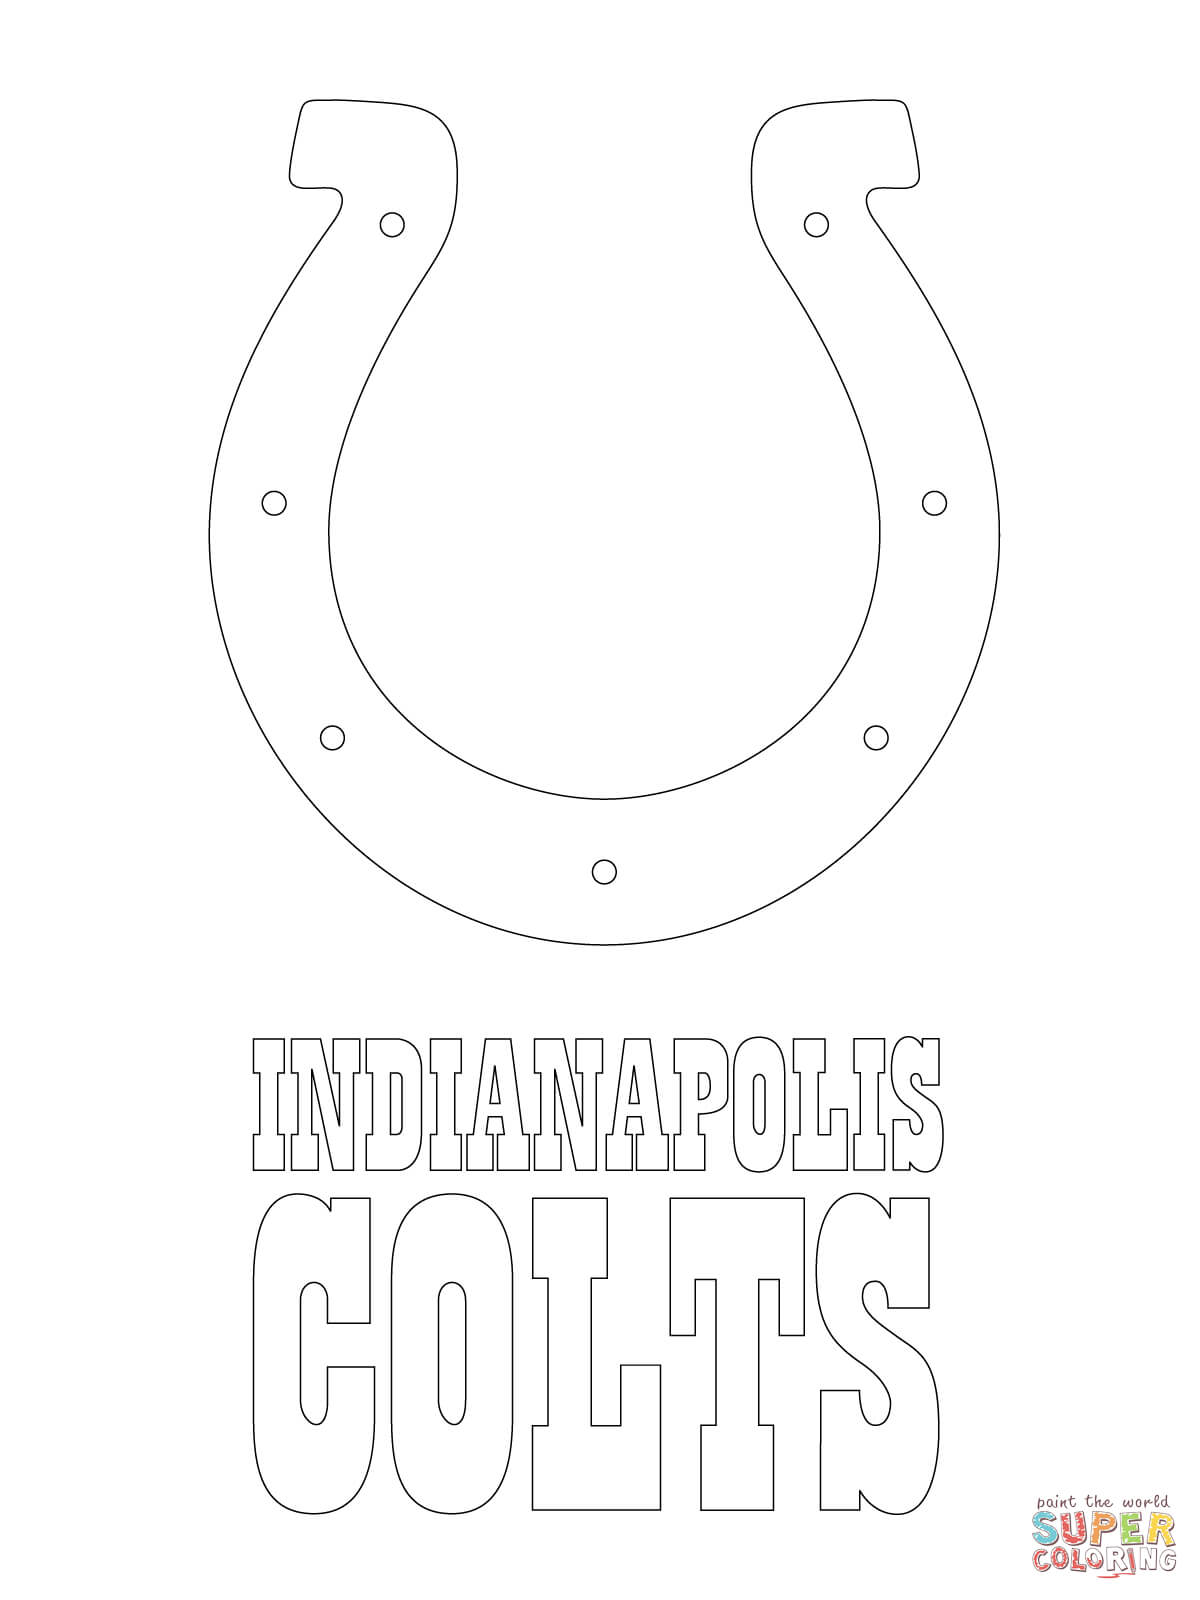 Colts Coloring Page